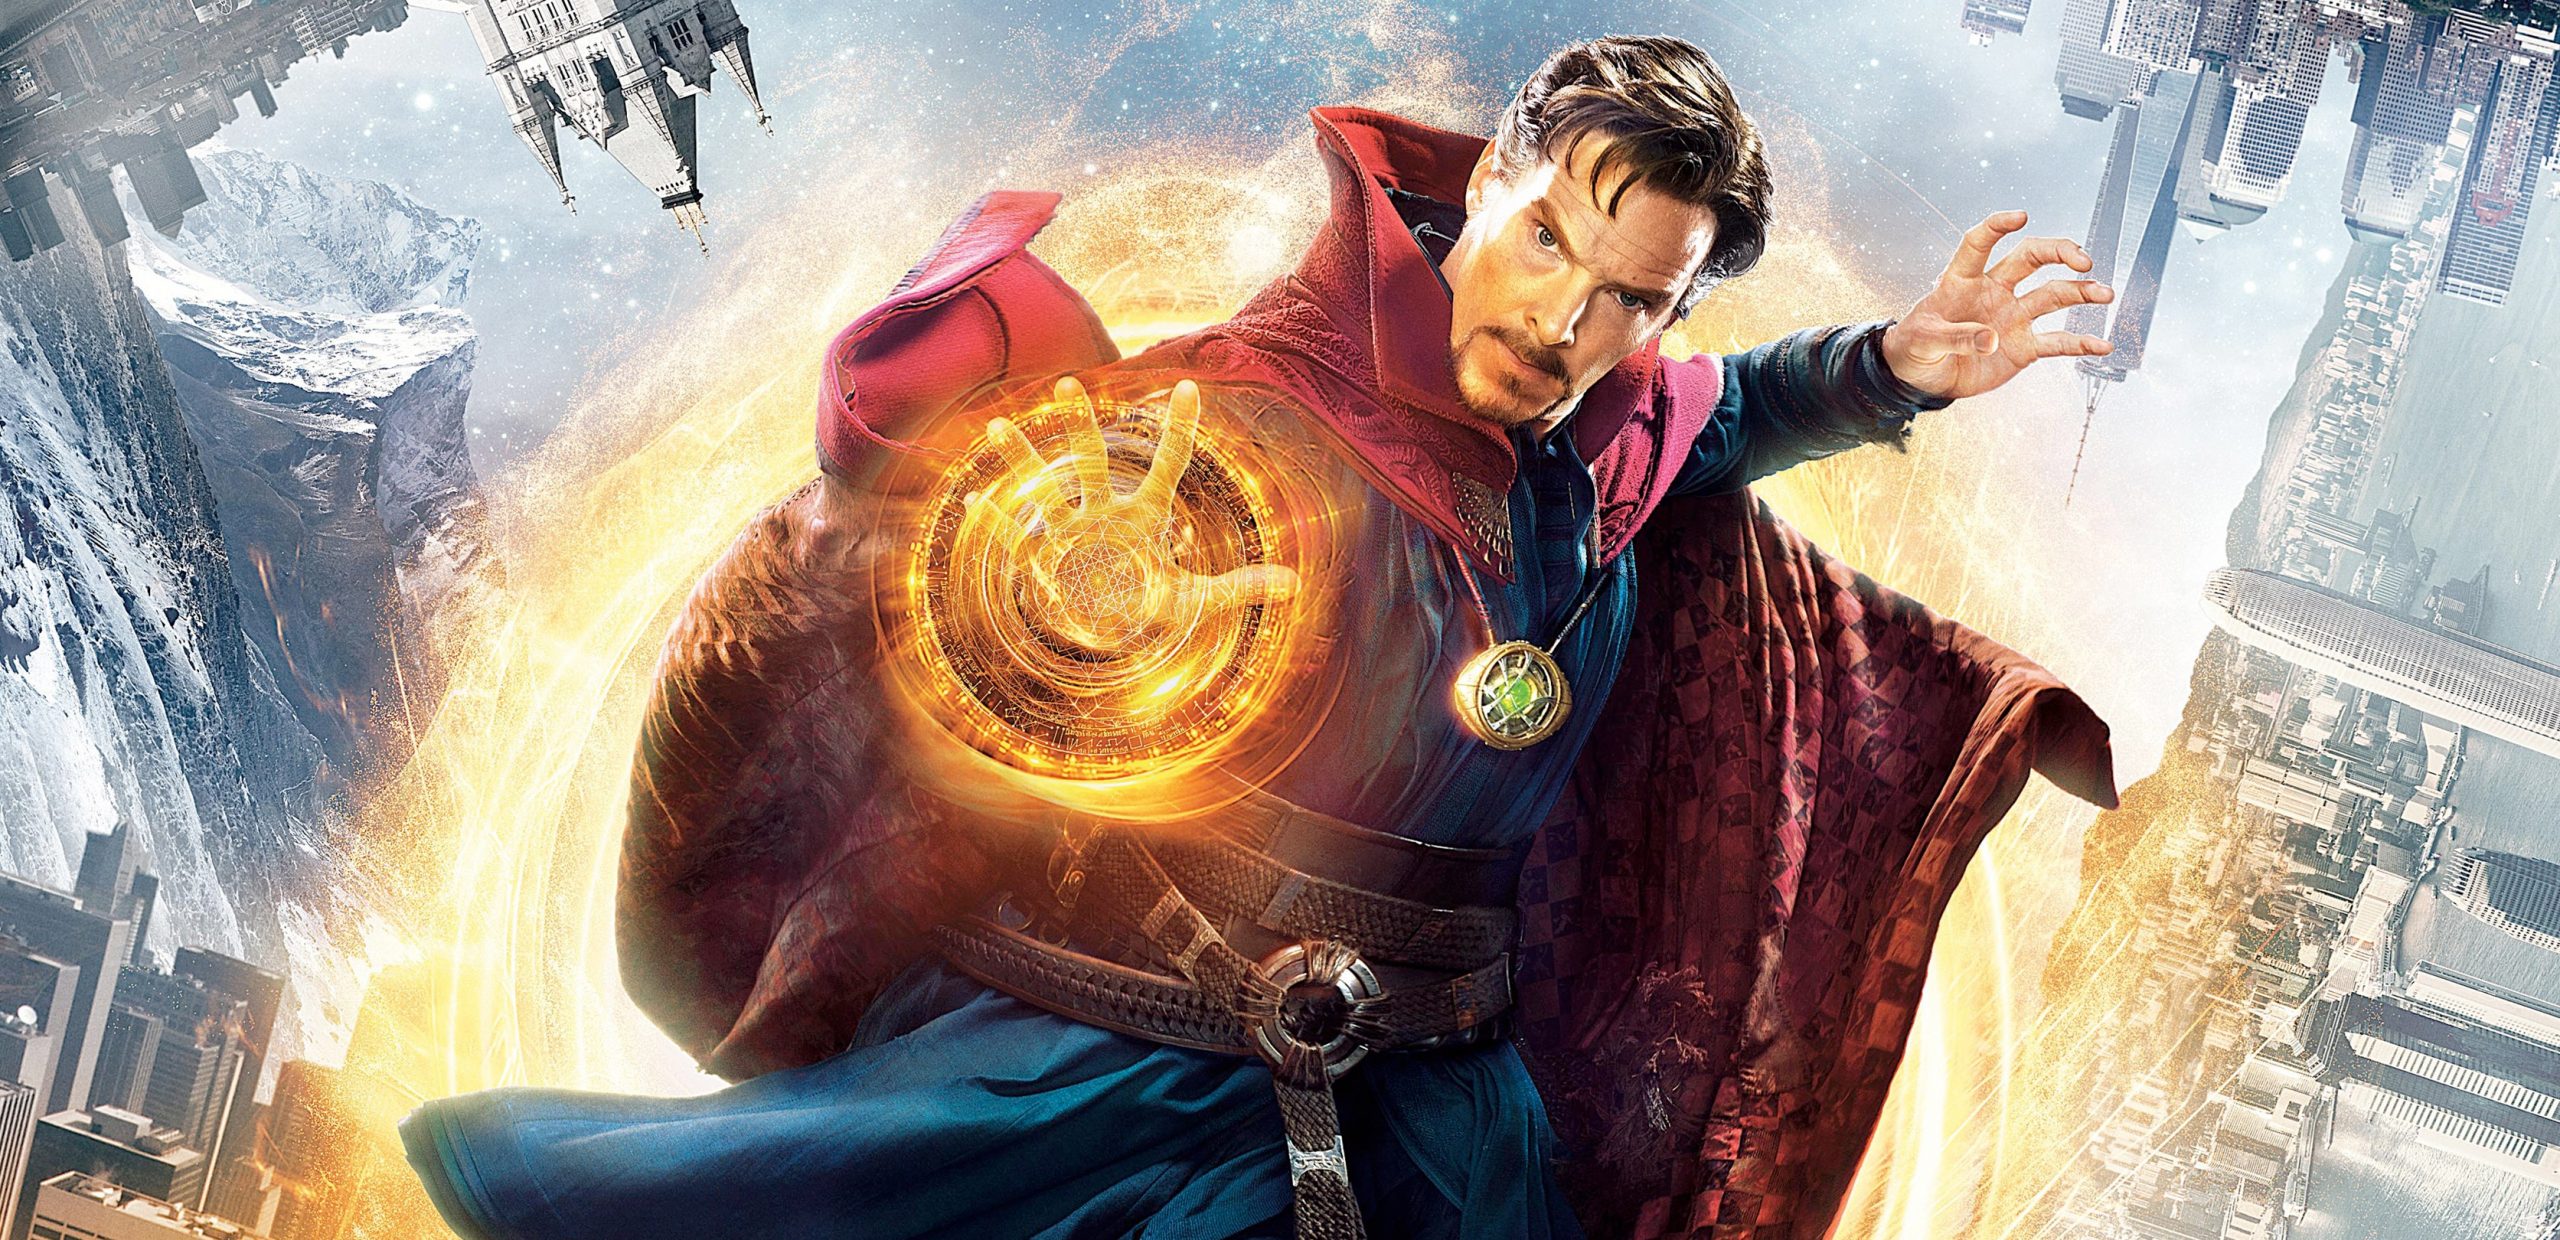 Sam Raimi Casually Confirms He Is Directing Doctor Strange Sequel